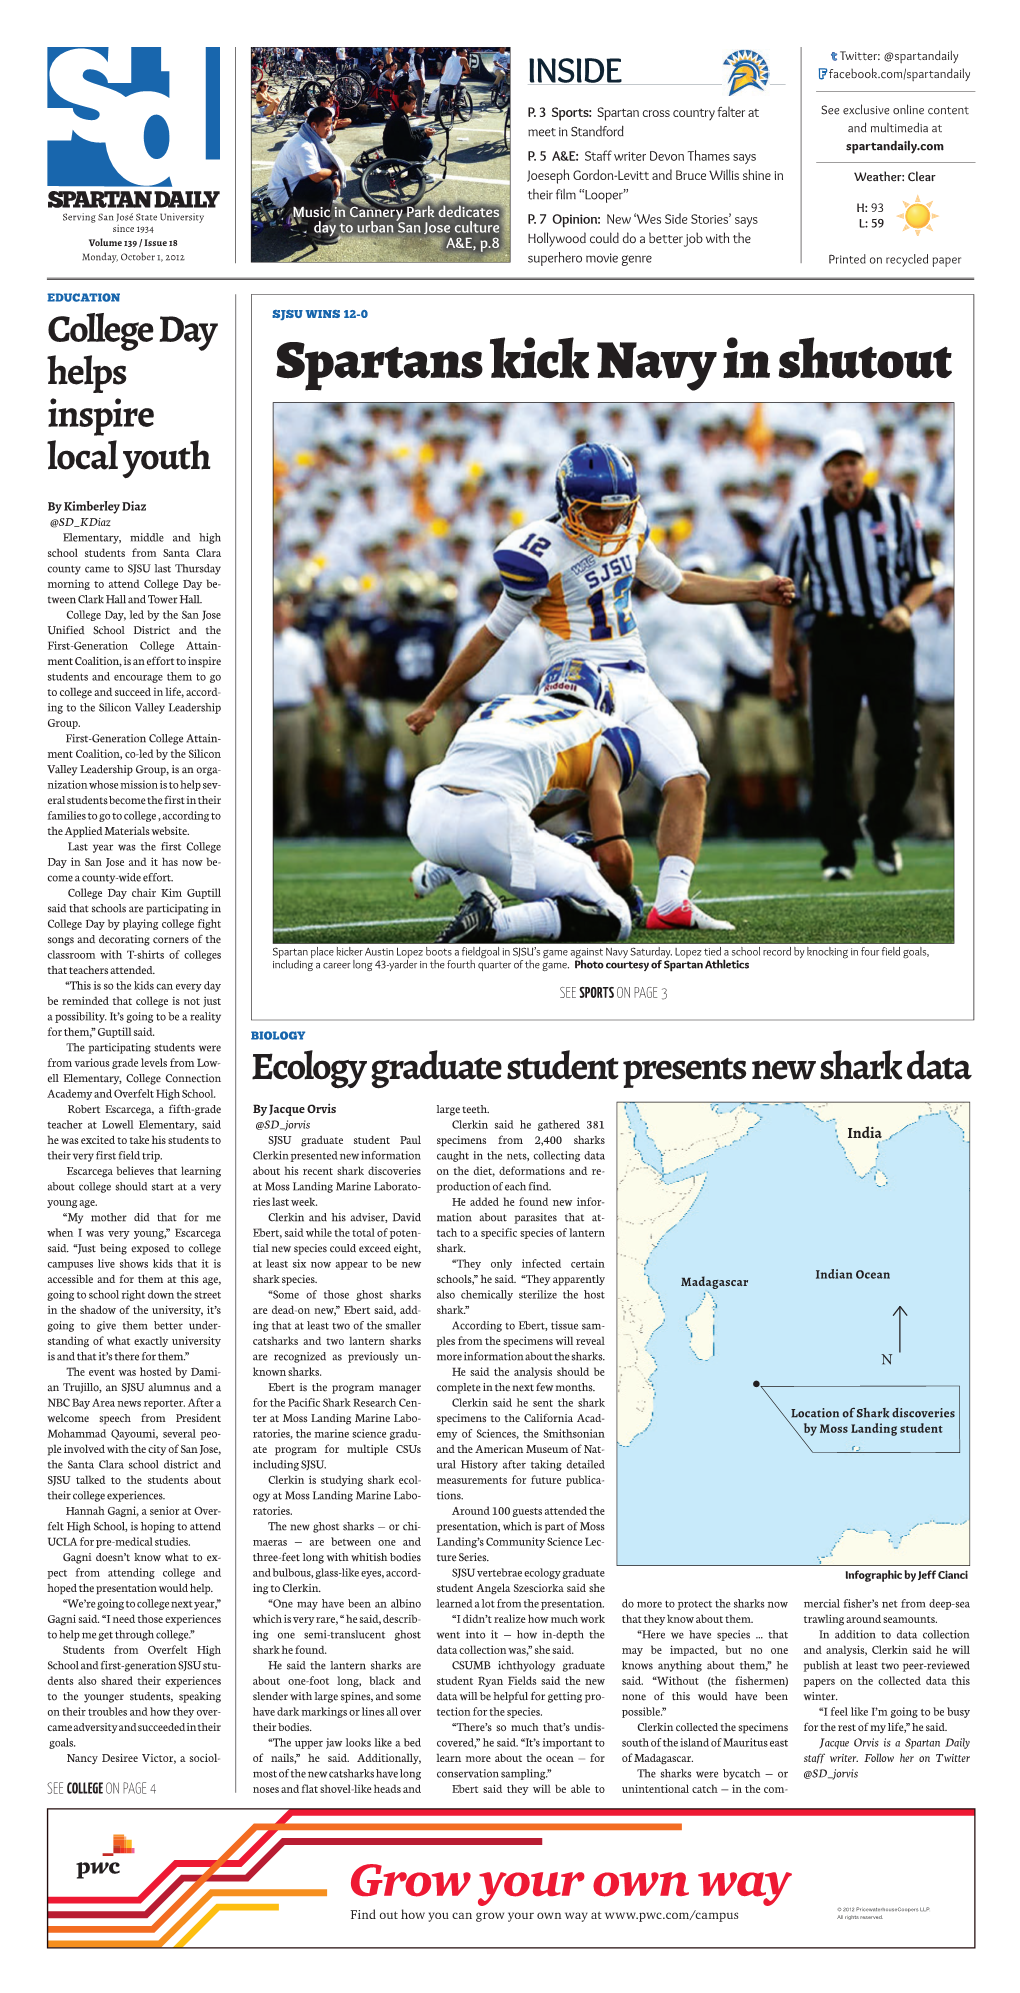 SPARTAN DAILY H: 93 Serving San José State University Music in Cannery Park Dedicates P